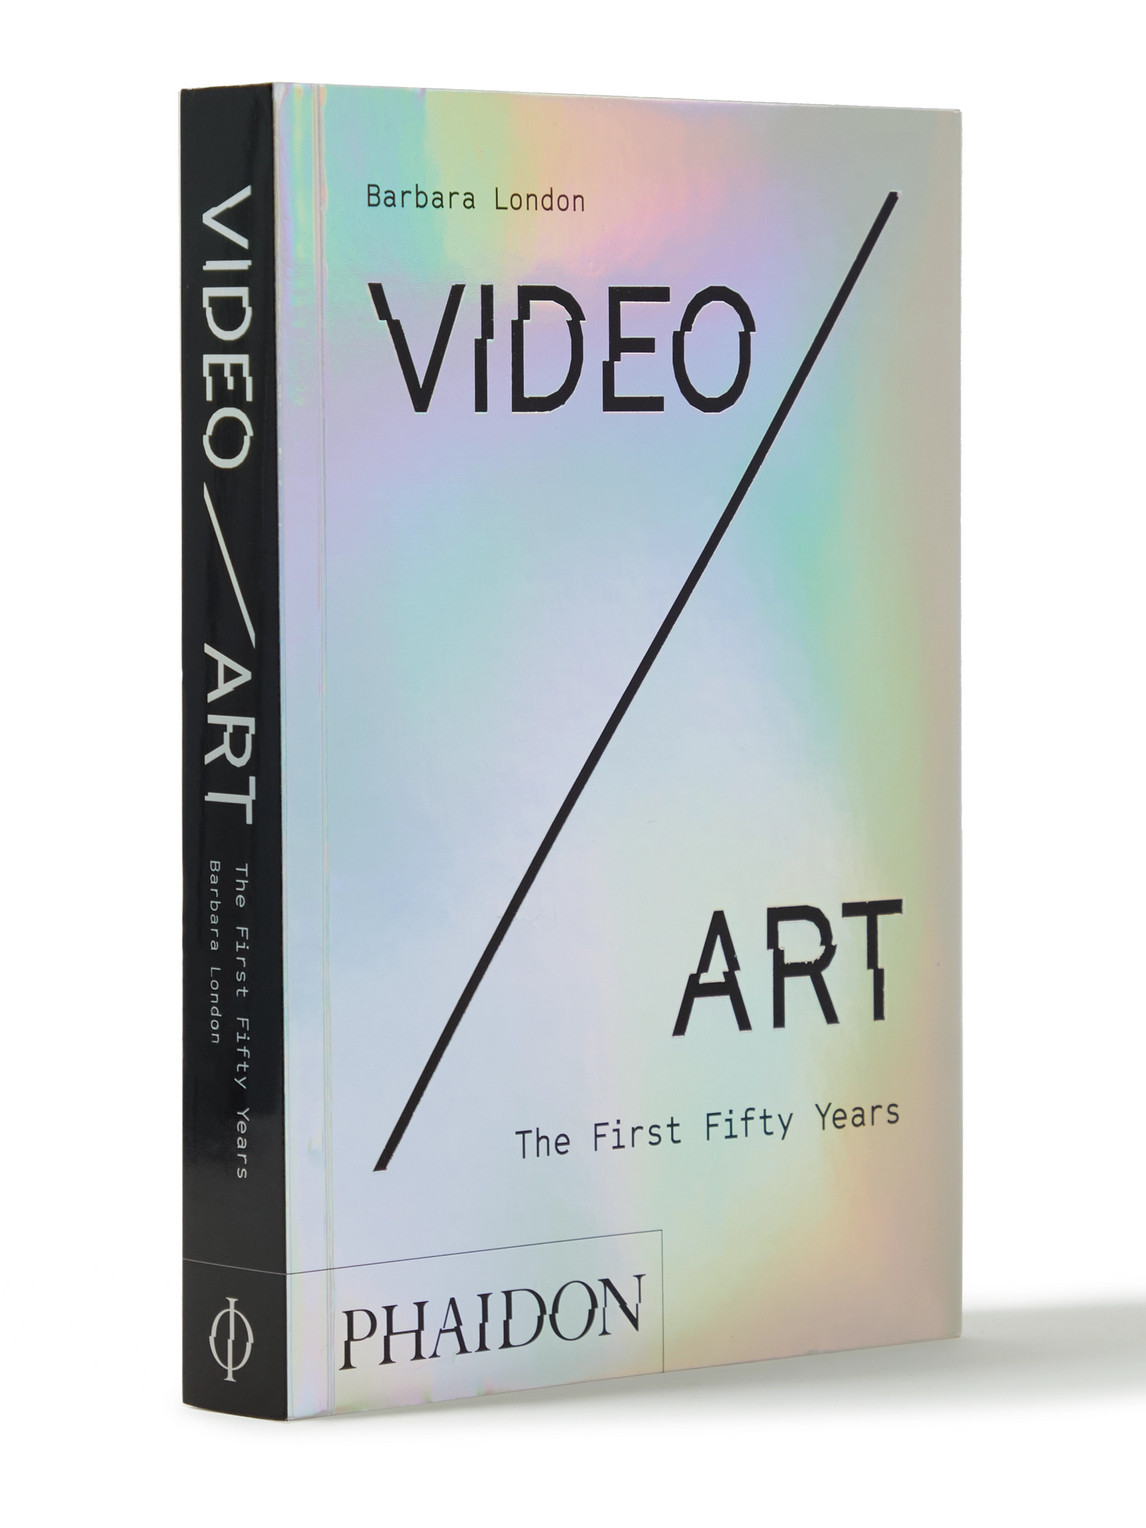 Phaidon Video/art: The First Fifty Years Paperback Book In Black